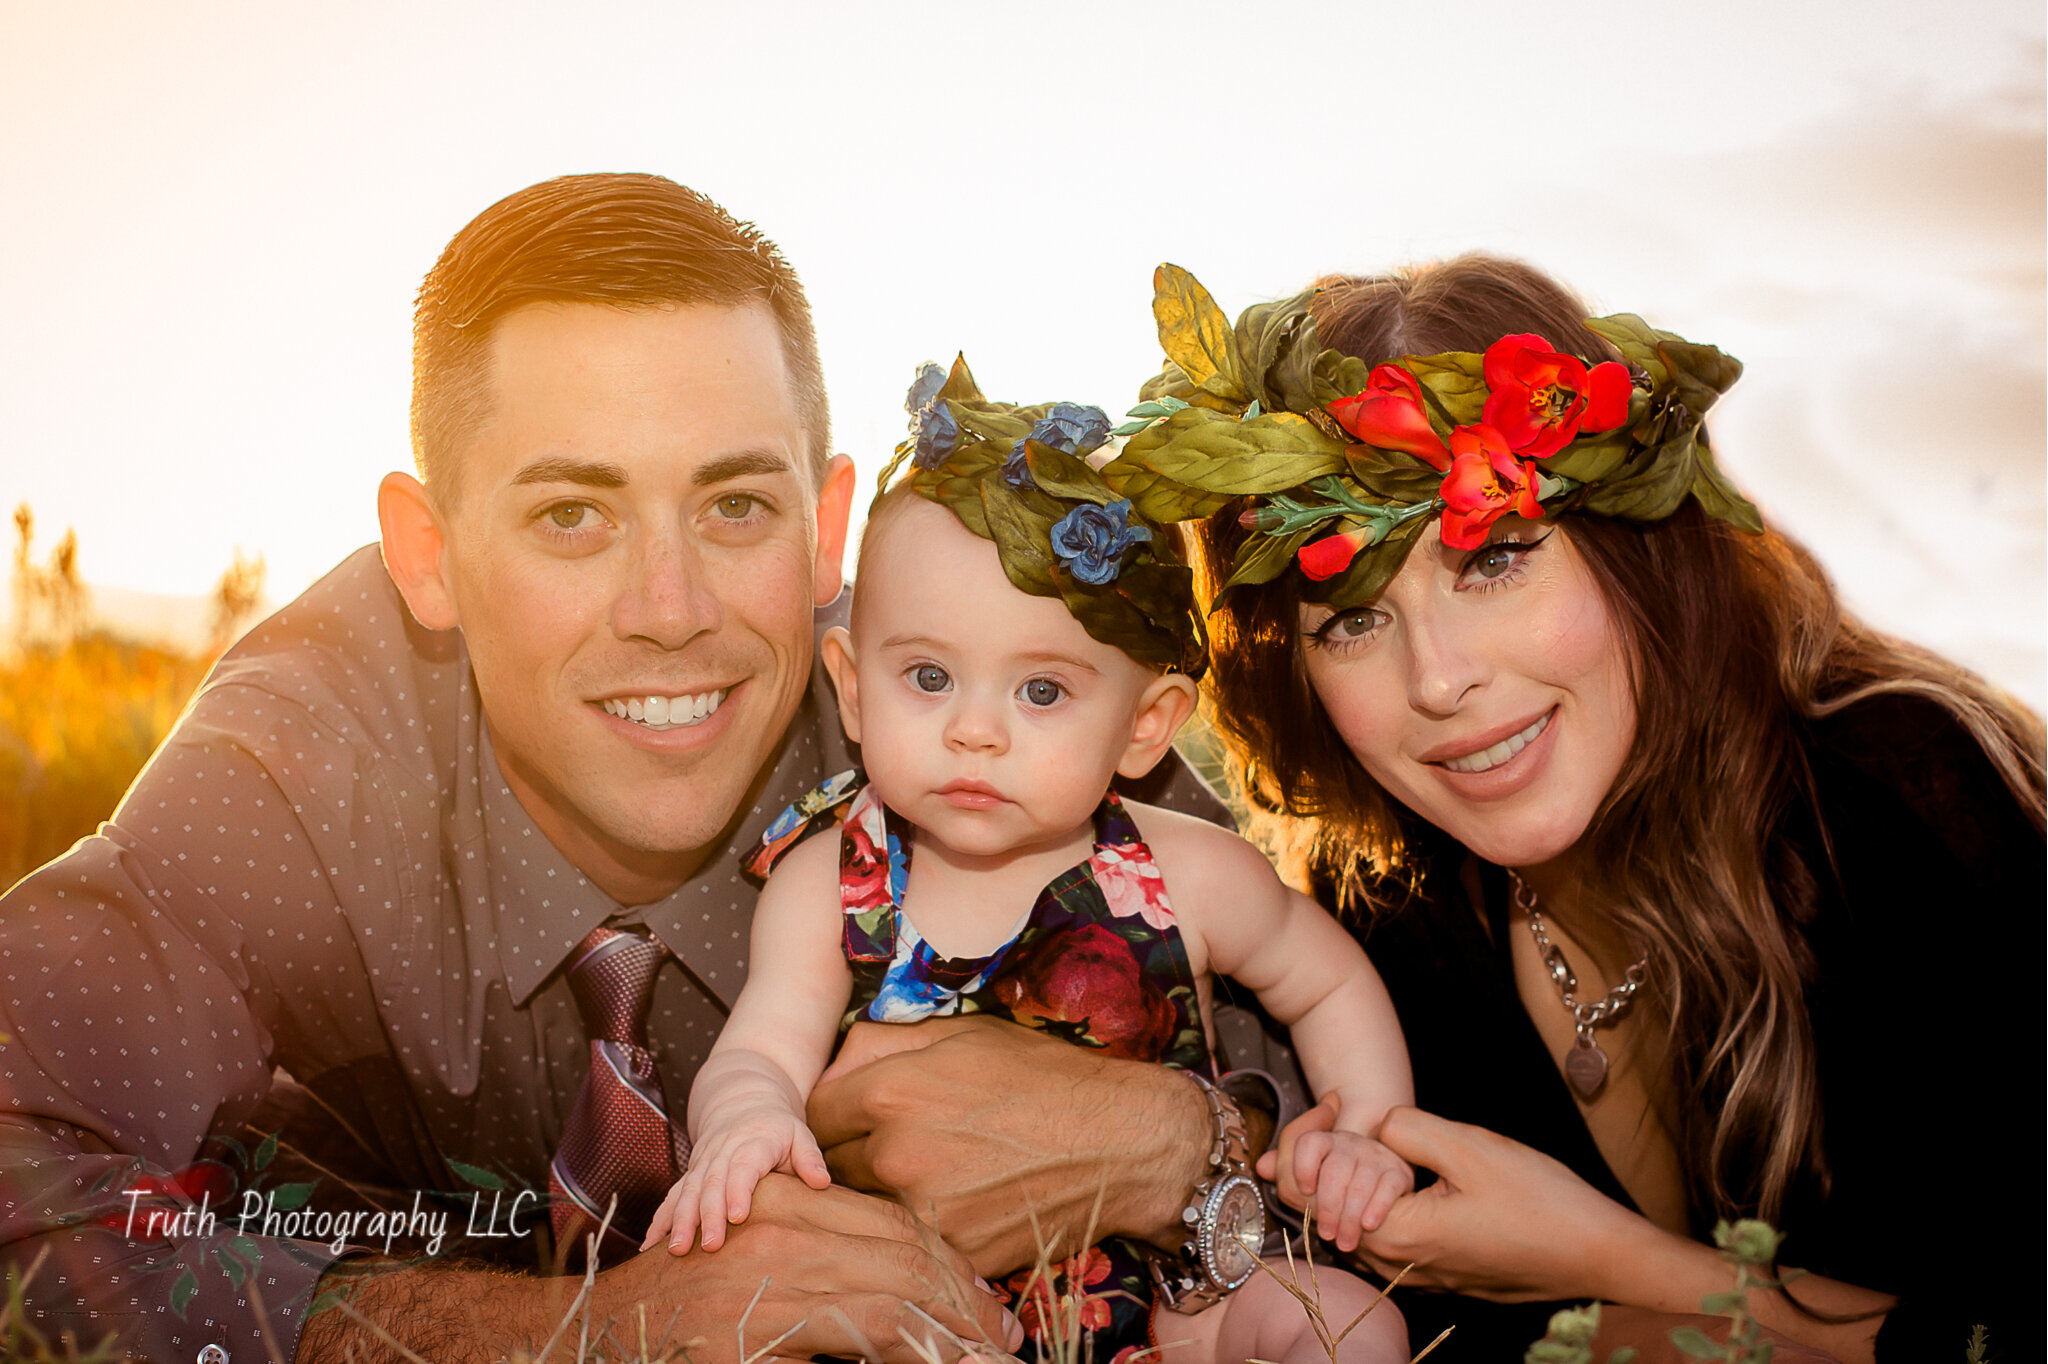 Truth-Photography-Westminster-co-family-photography.jpg